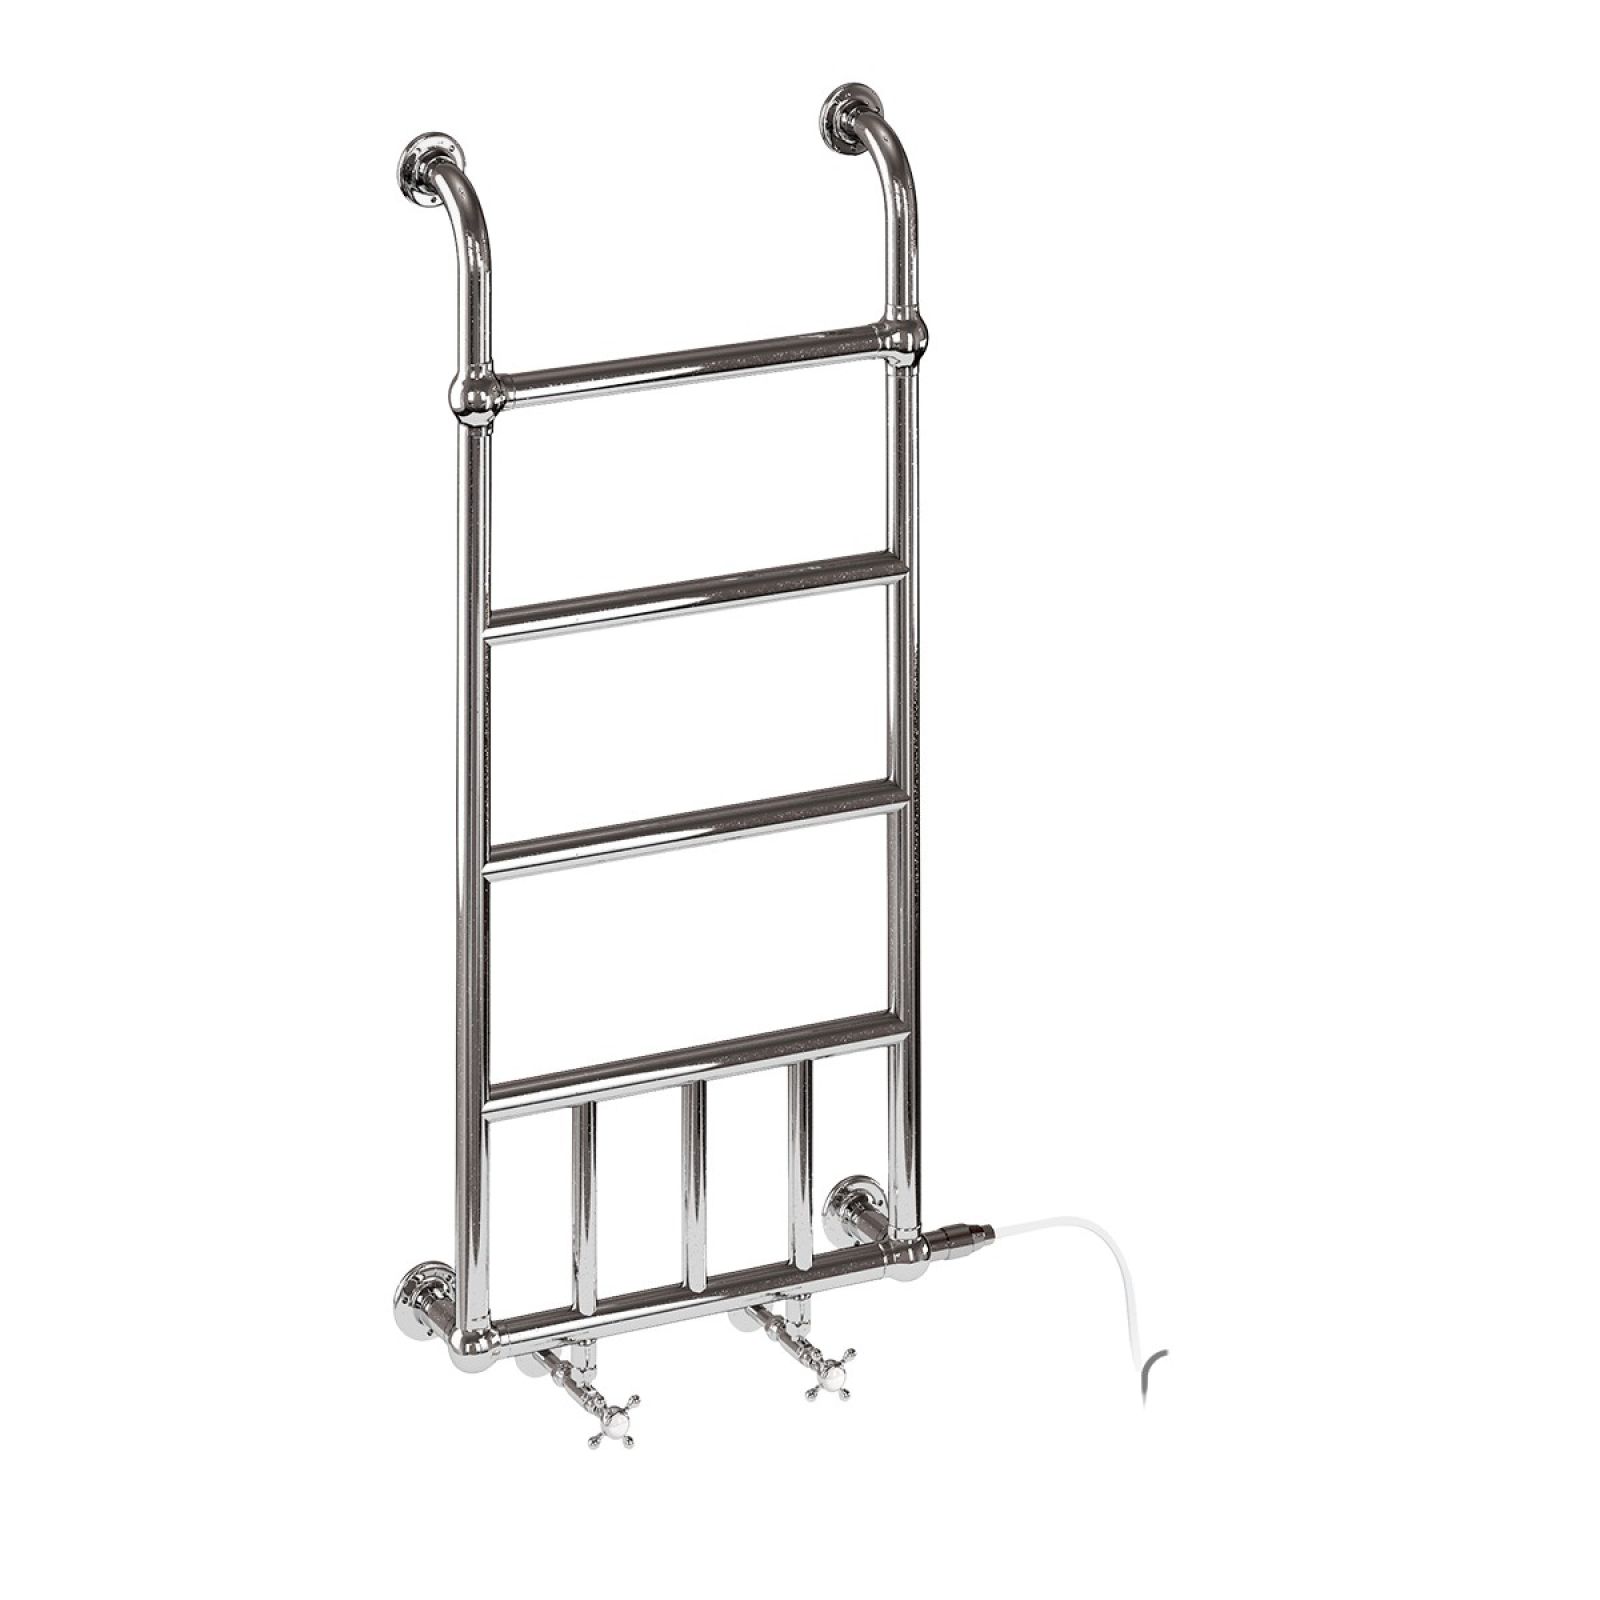 Chapter heated towel rail - 1142x542mm in a chrome finish